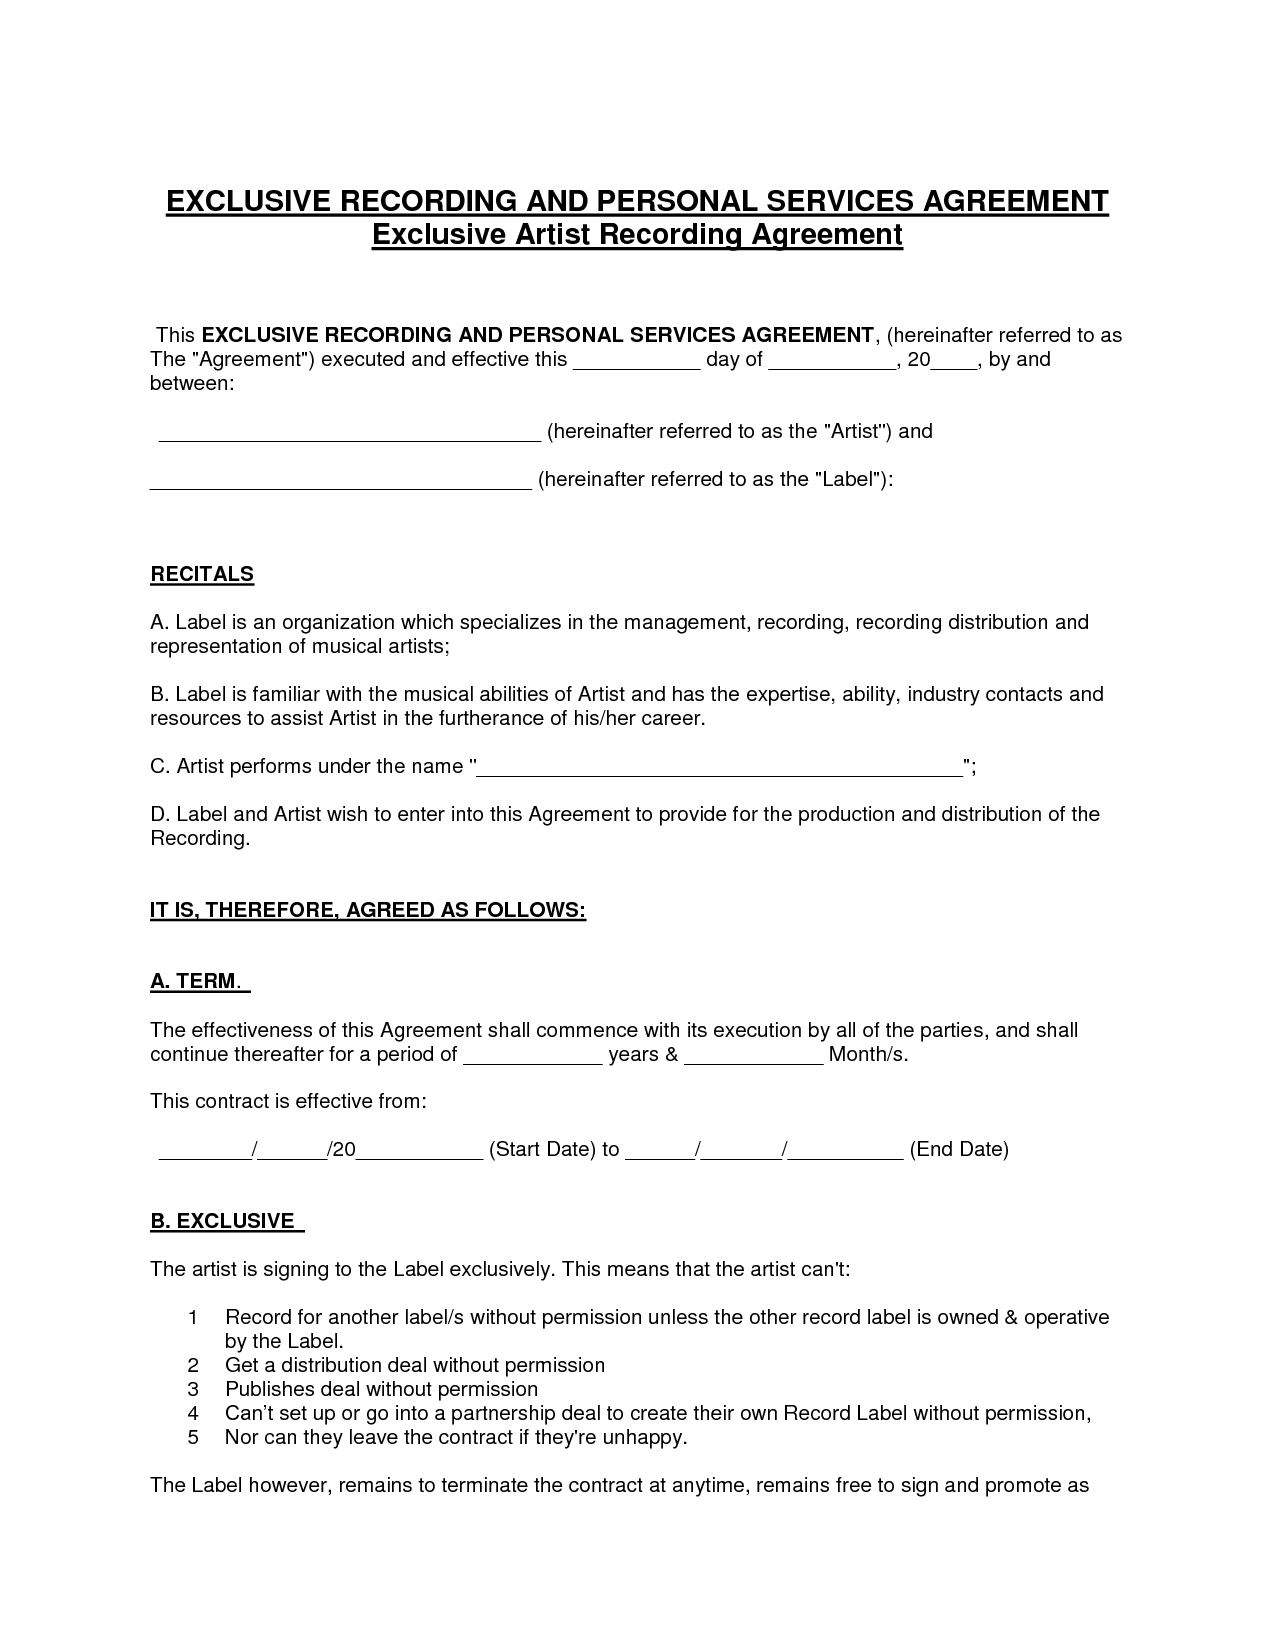 Songwriter Agreement Template